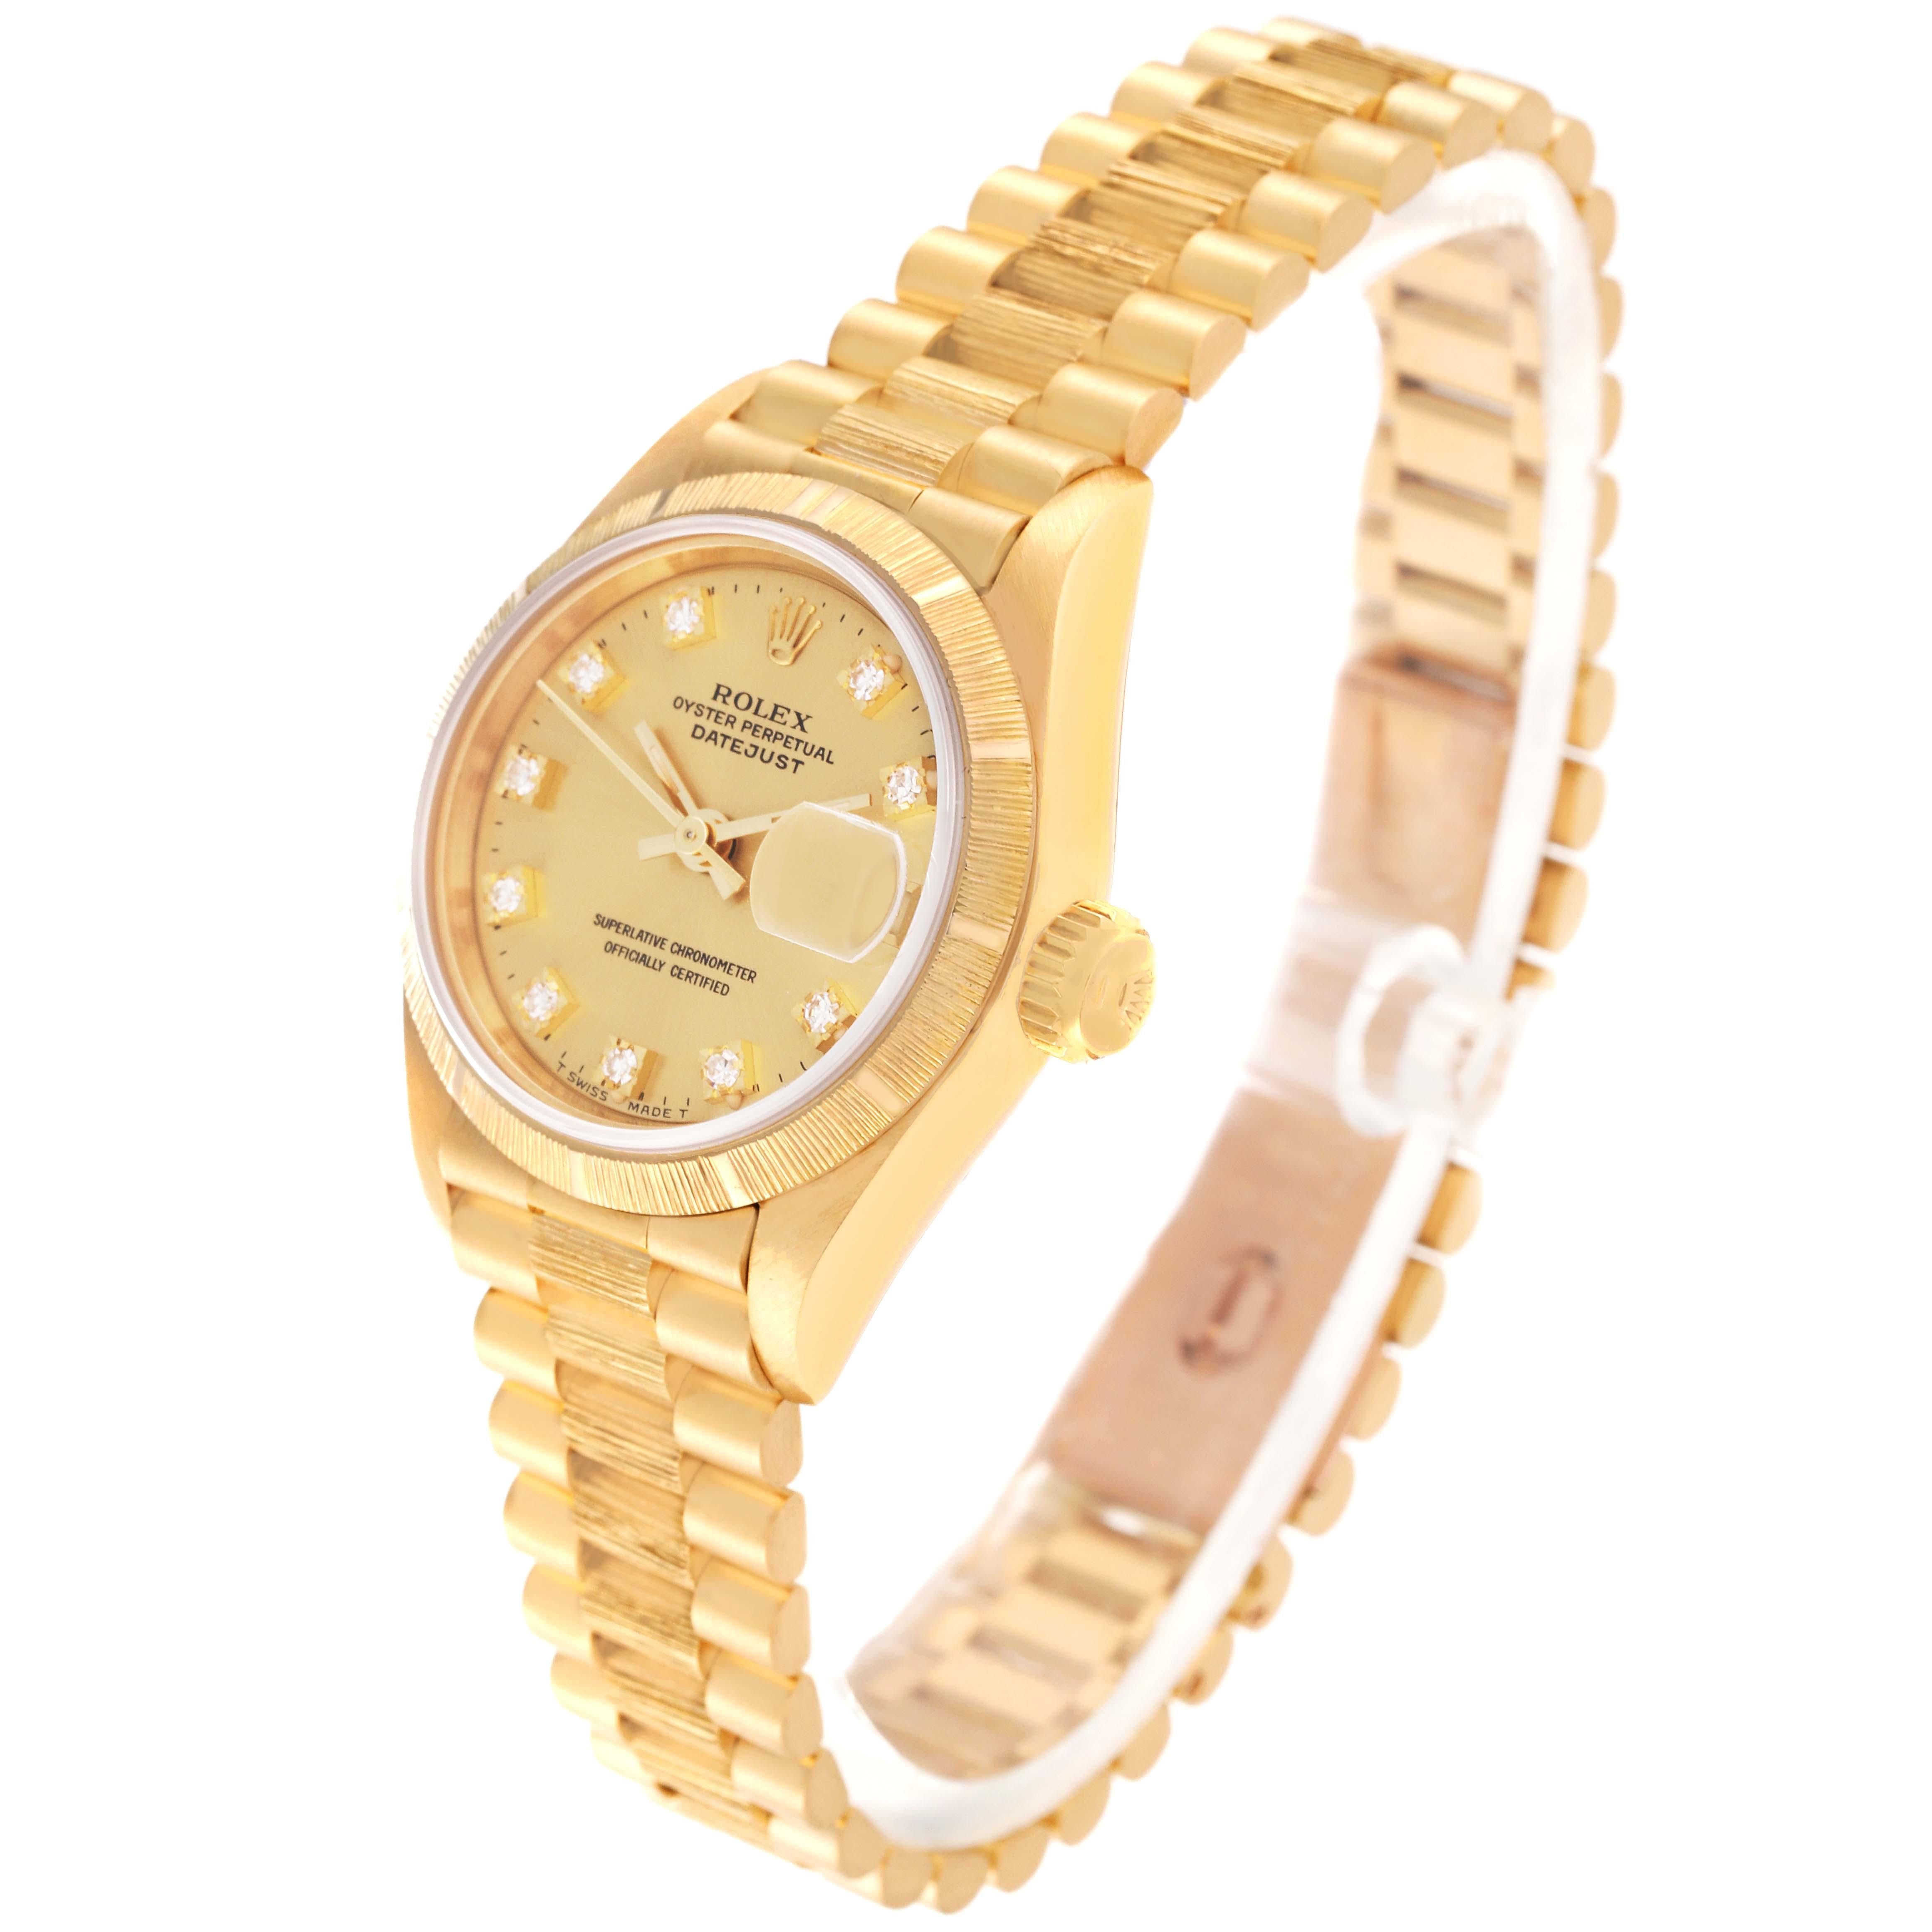 Rolex Datejust President Diamond Dial Yellow Gold Bark Finish Ladies Watch 69278 For Sale 6